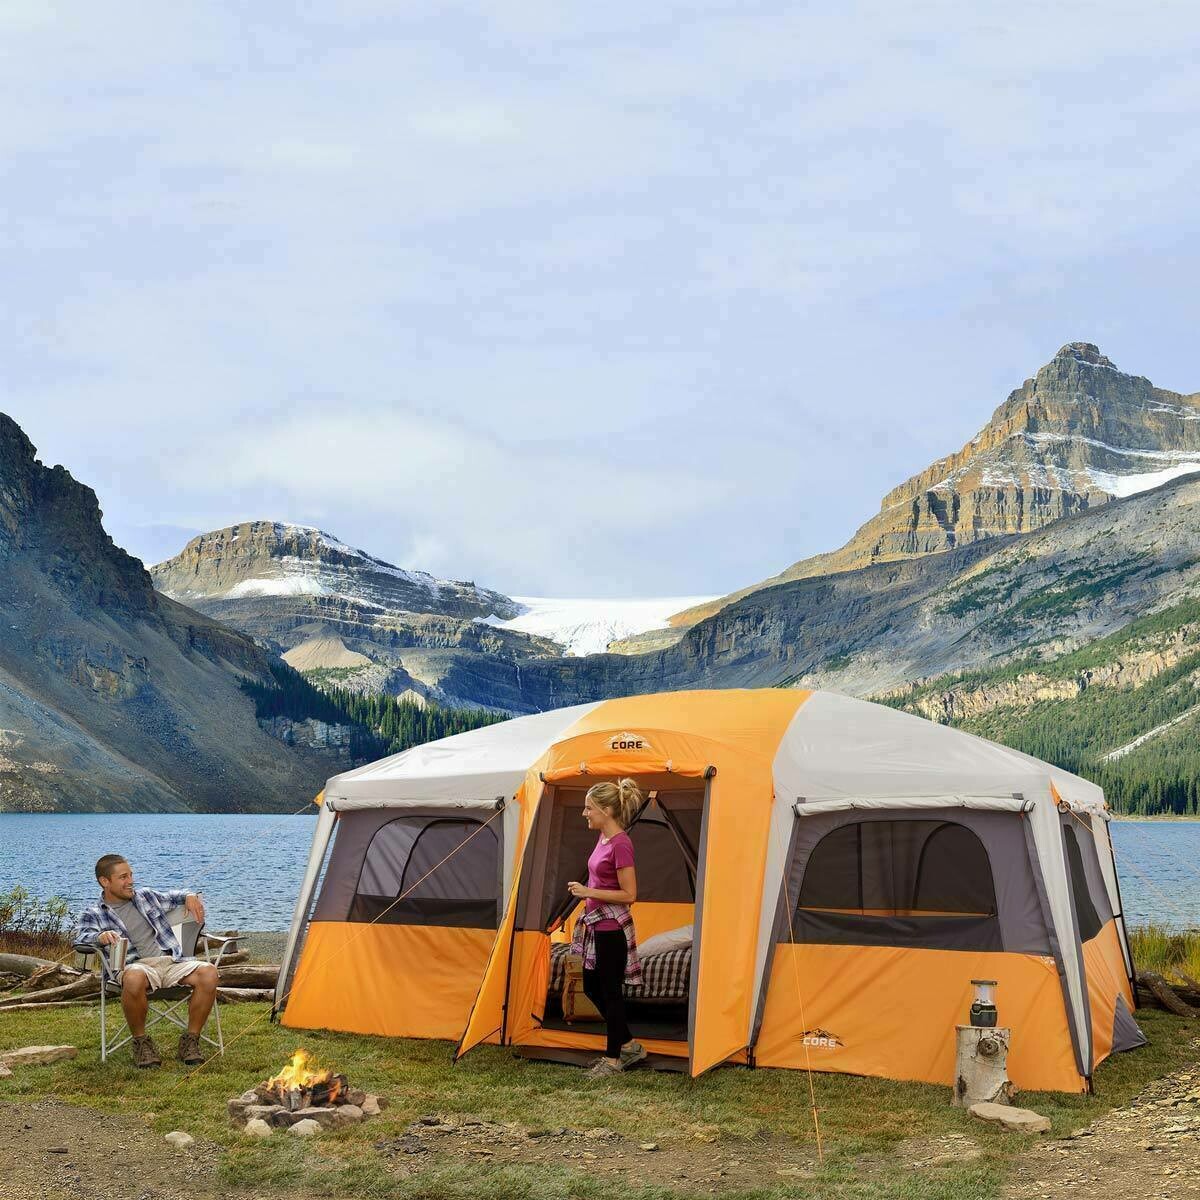 Camp Valley 12 Person Straight Wall Camping Tent - Supply Outlet